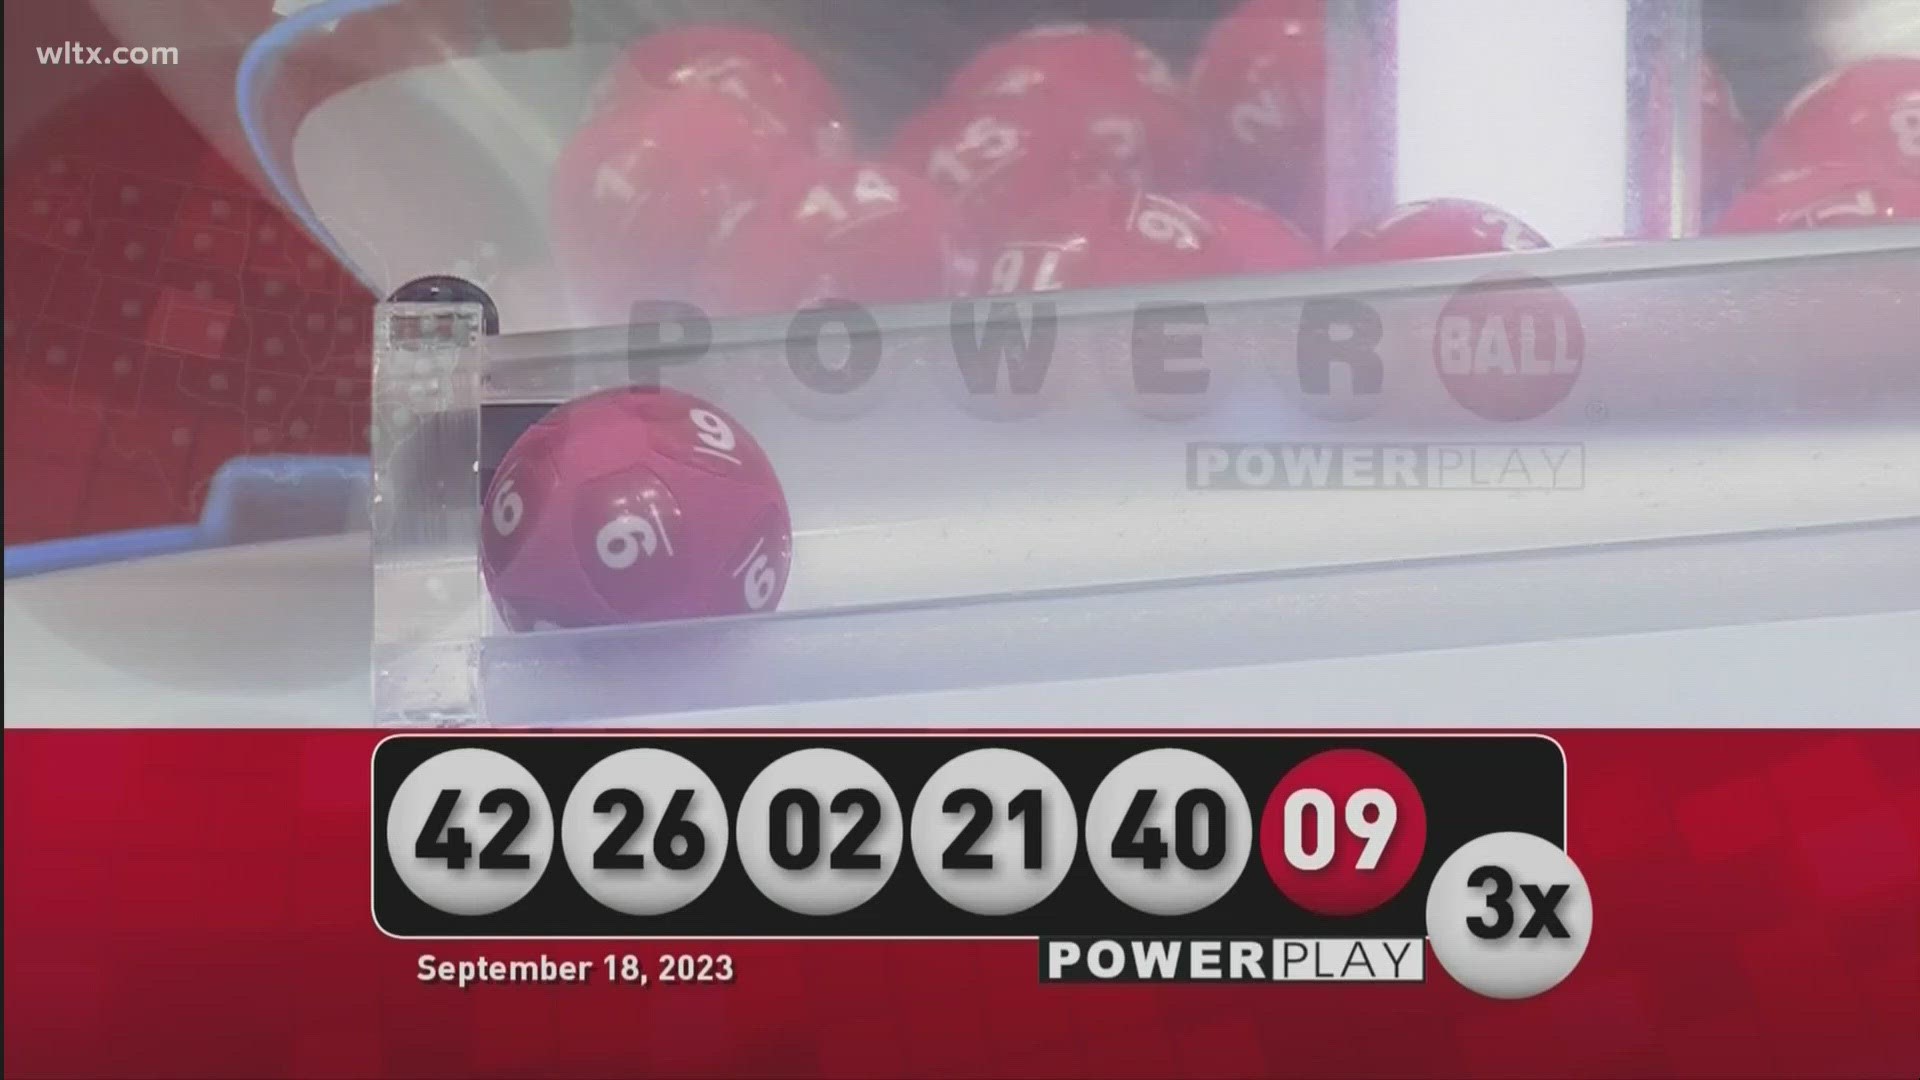 Here are the winning Powerball numbers for September 18, 2023.